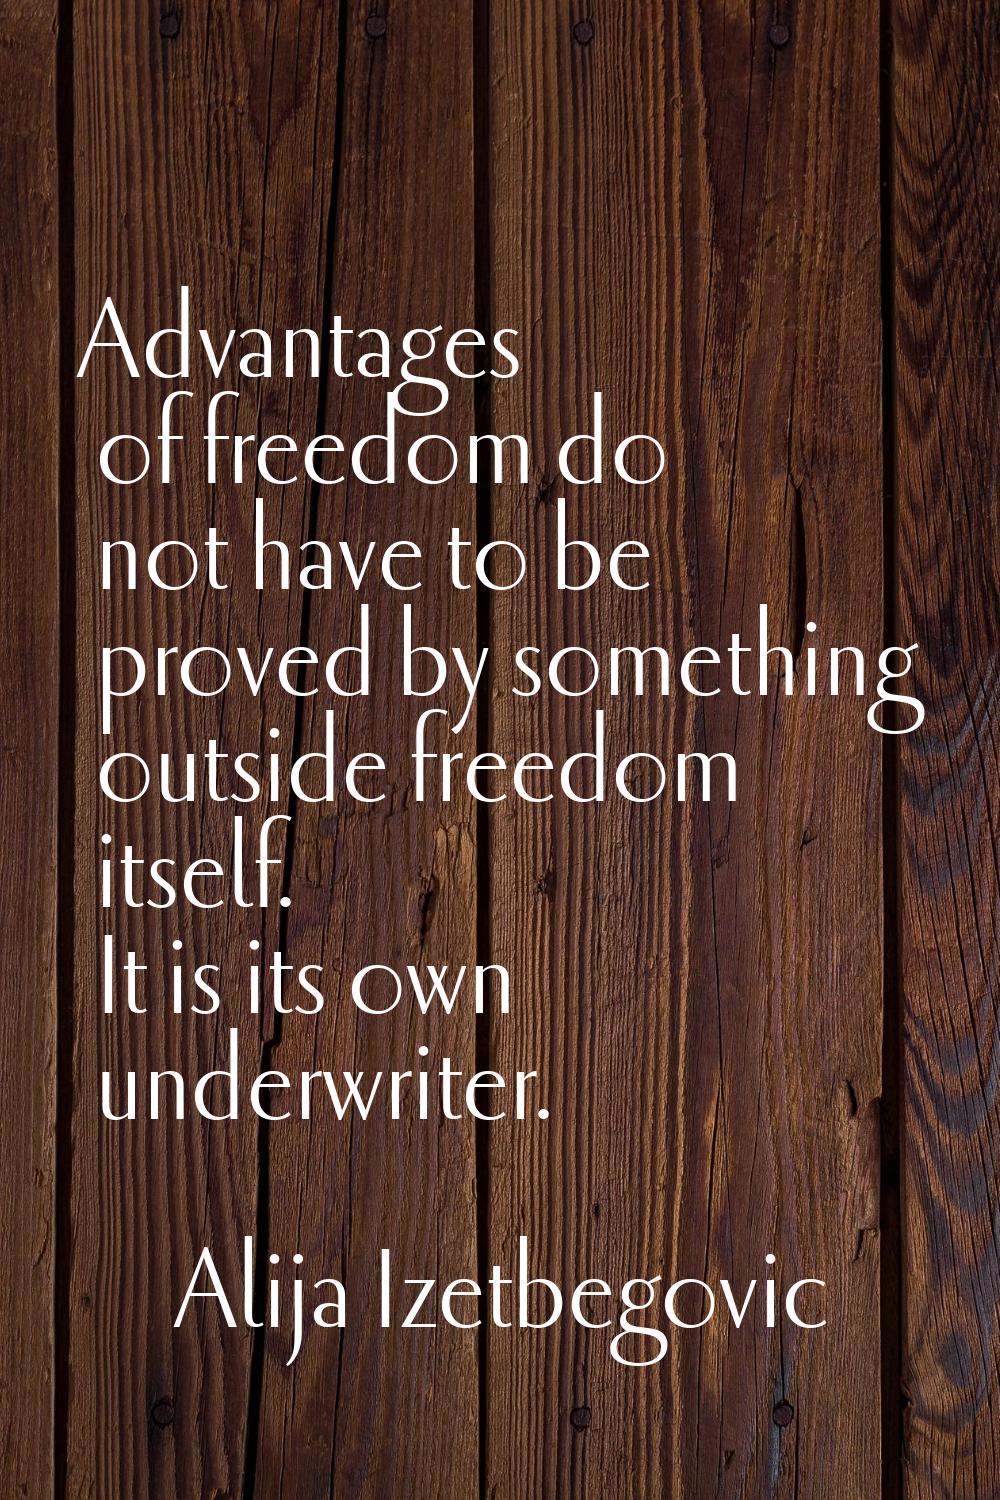 Advantages of freedom do not have to be proved by something outside freedom itself. It is its own u